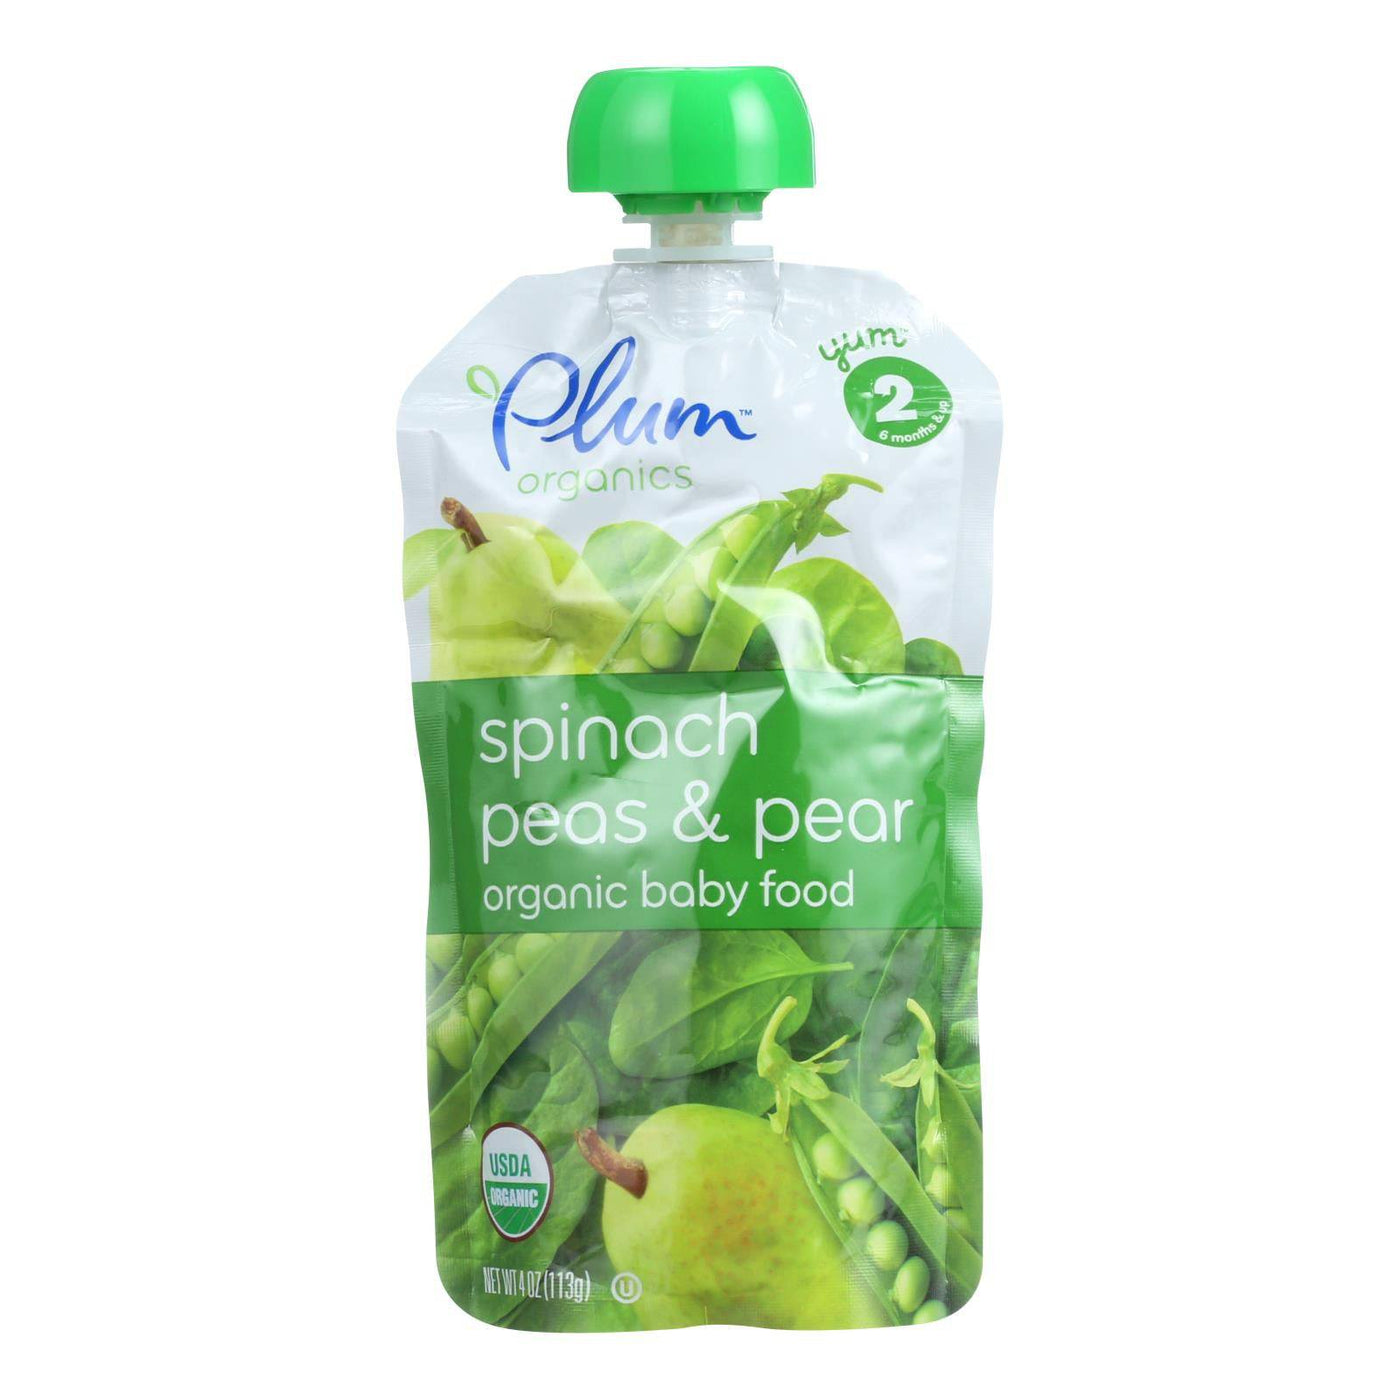 Plum Organics Baby Food - Organic - Spinach Peas And Pear - Stage 2 - 6 Months And Up - 3.5 .oz - Case Of 6 | OnlyNaturals.us